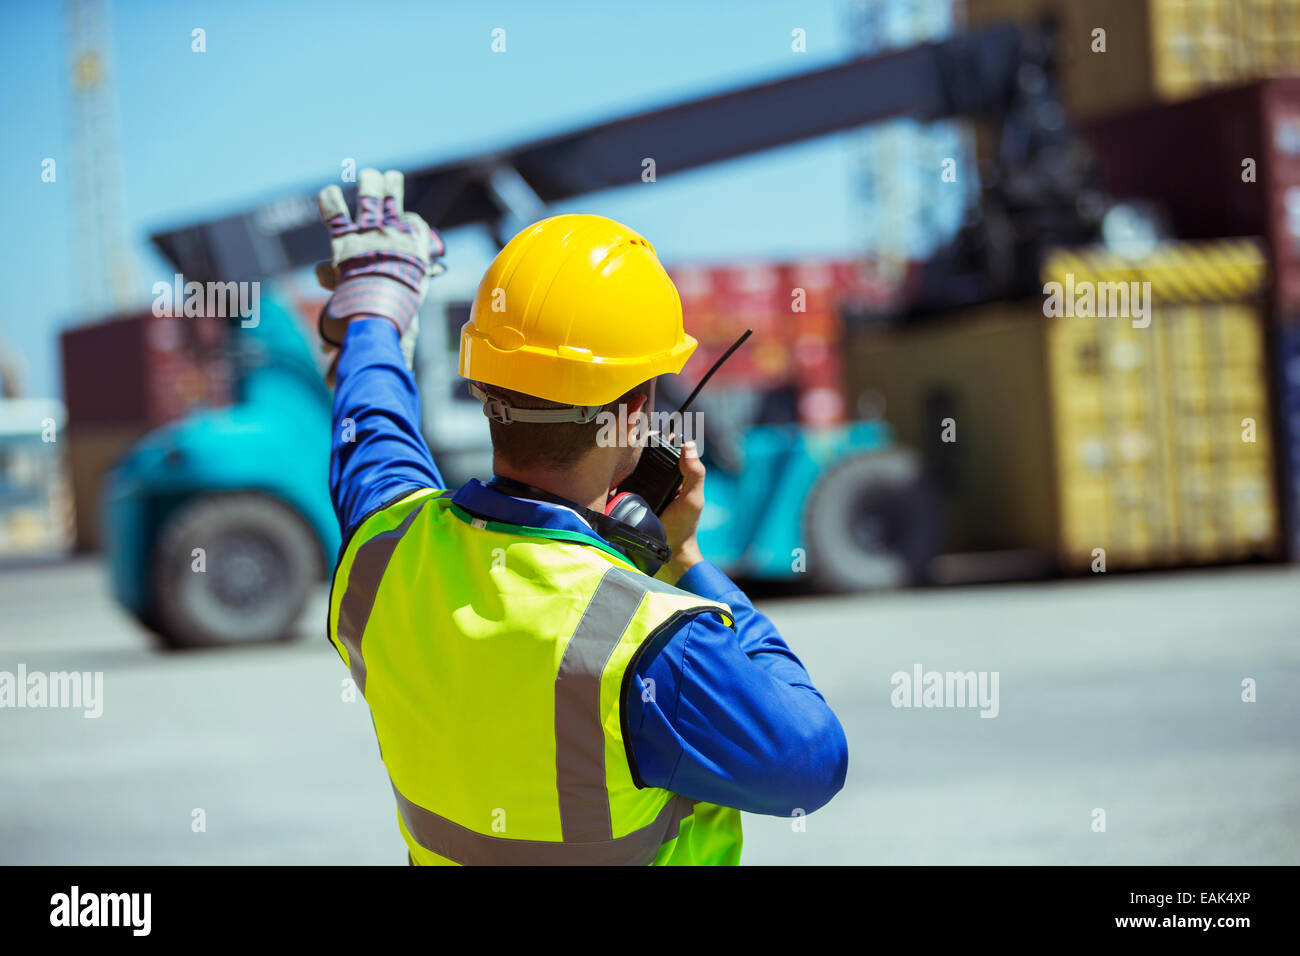 Worker using walkie-talkie near cargo containers Stock Photo